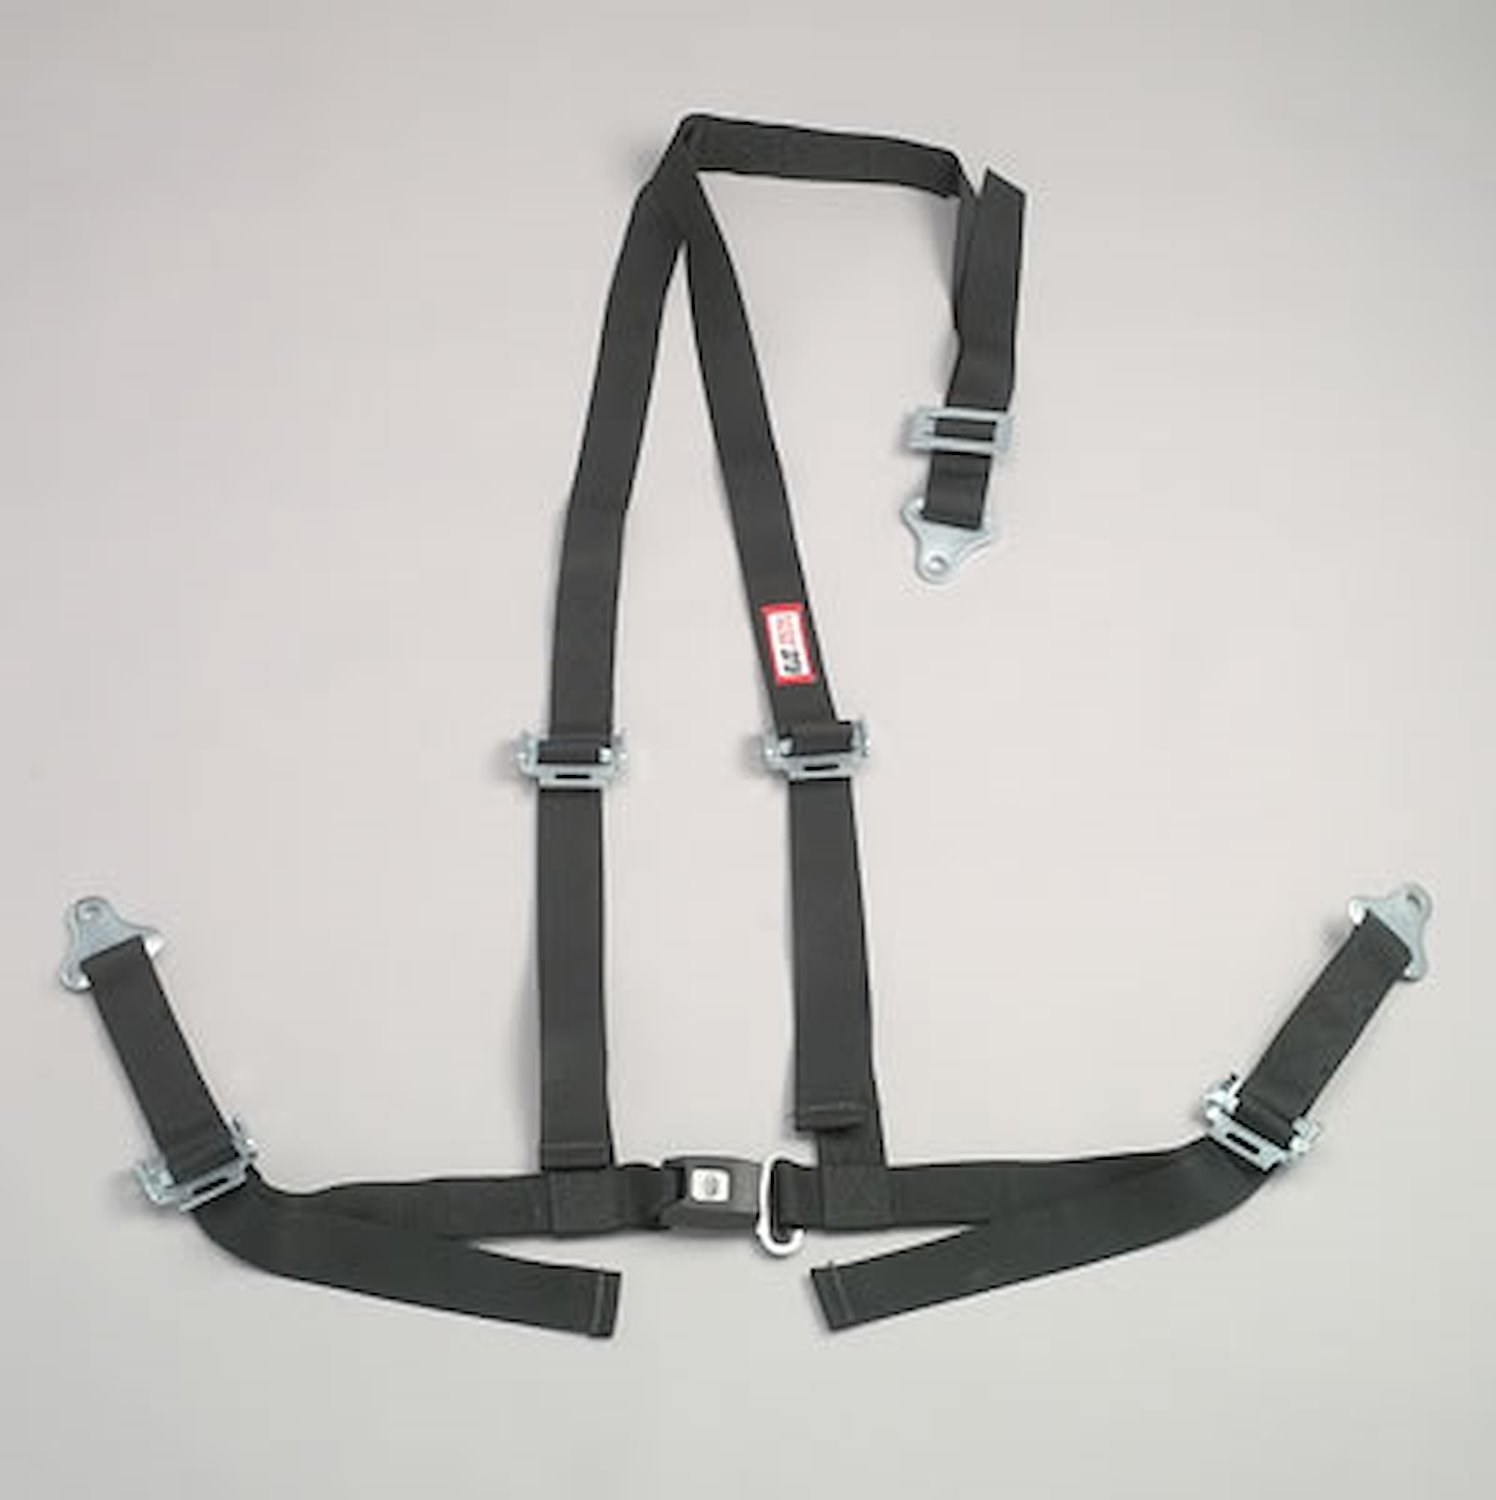 NON-SFI B&T HARNESS 2 PULL UP Lap Belt 2 S. H. V ROLL BAR Mount ALL WRAP ENDS ORANGE